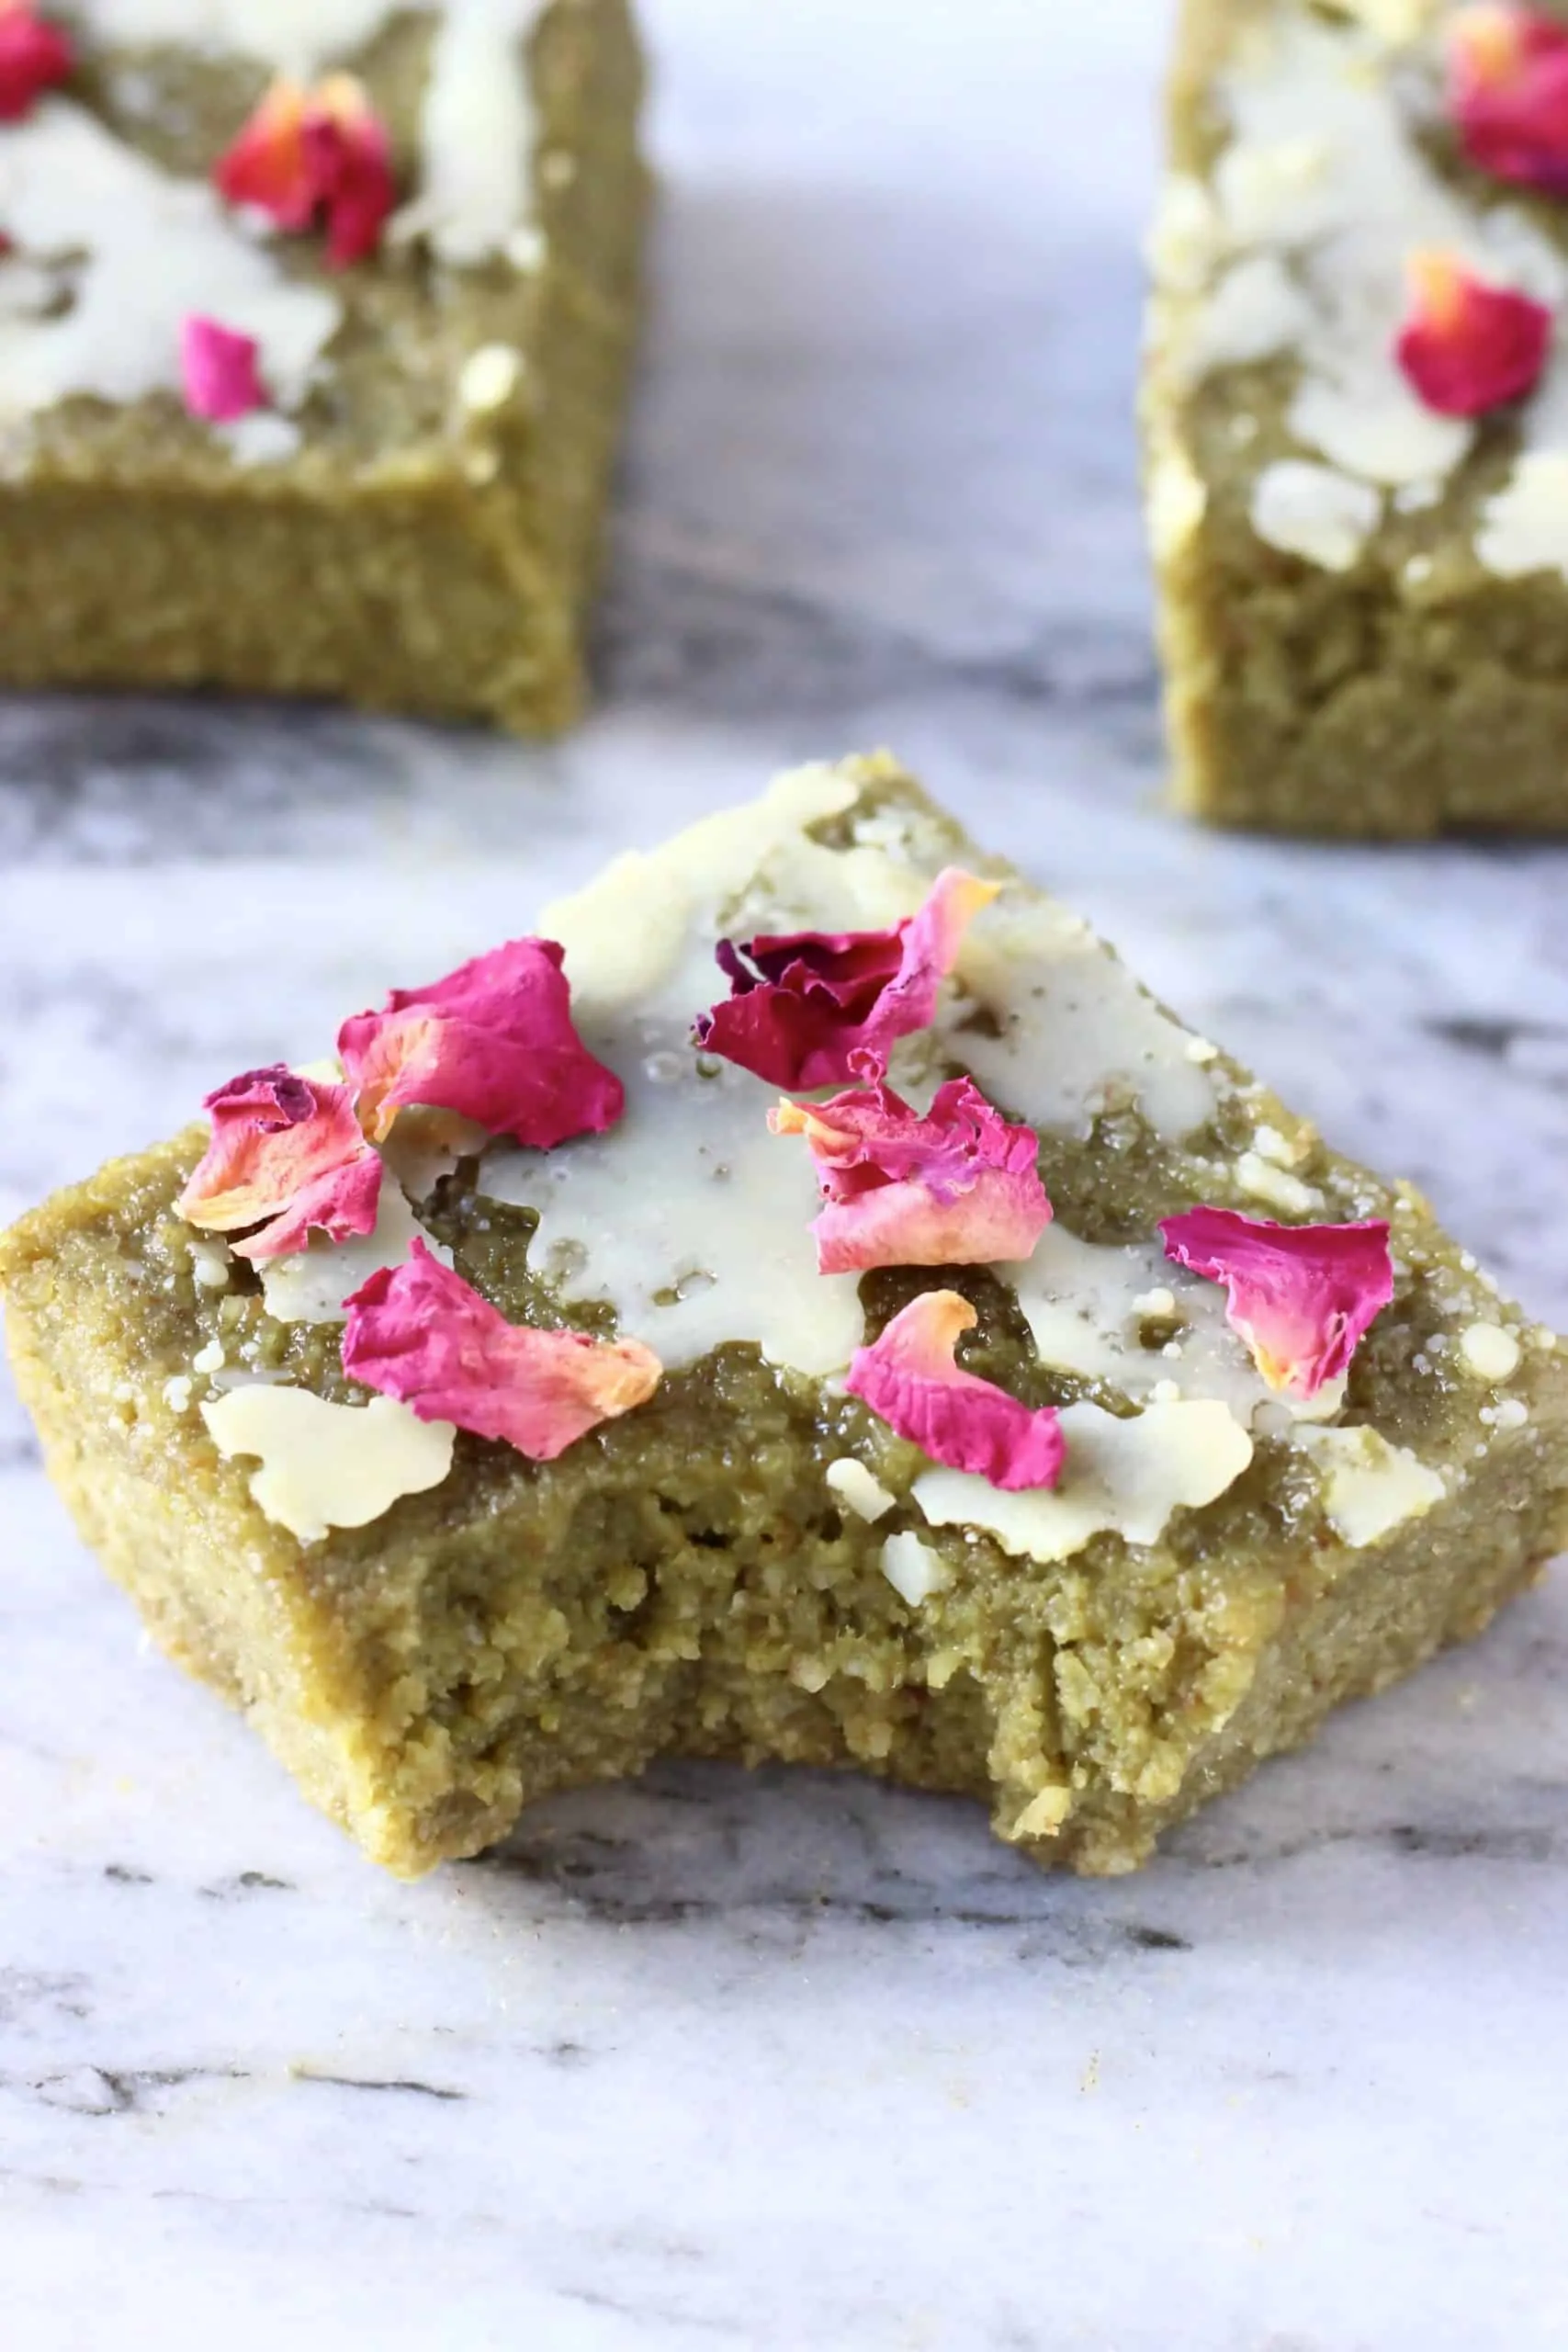 A gluten-free vegan matcha brownie topped with a white chocolate glaze and rose petals with a bite taken out of it